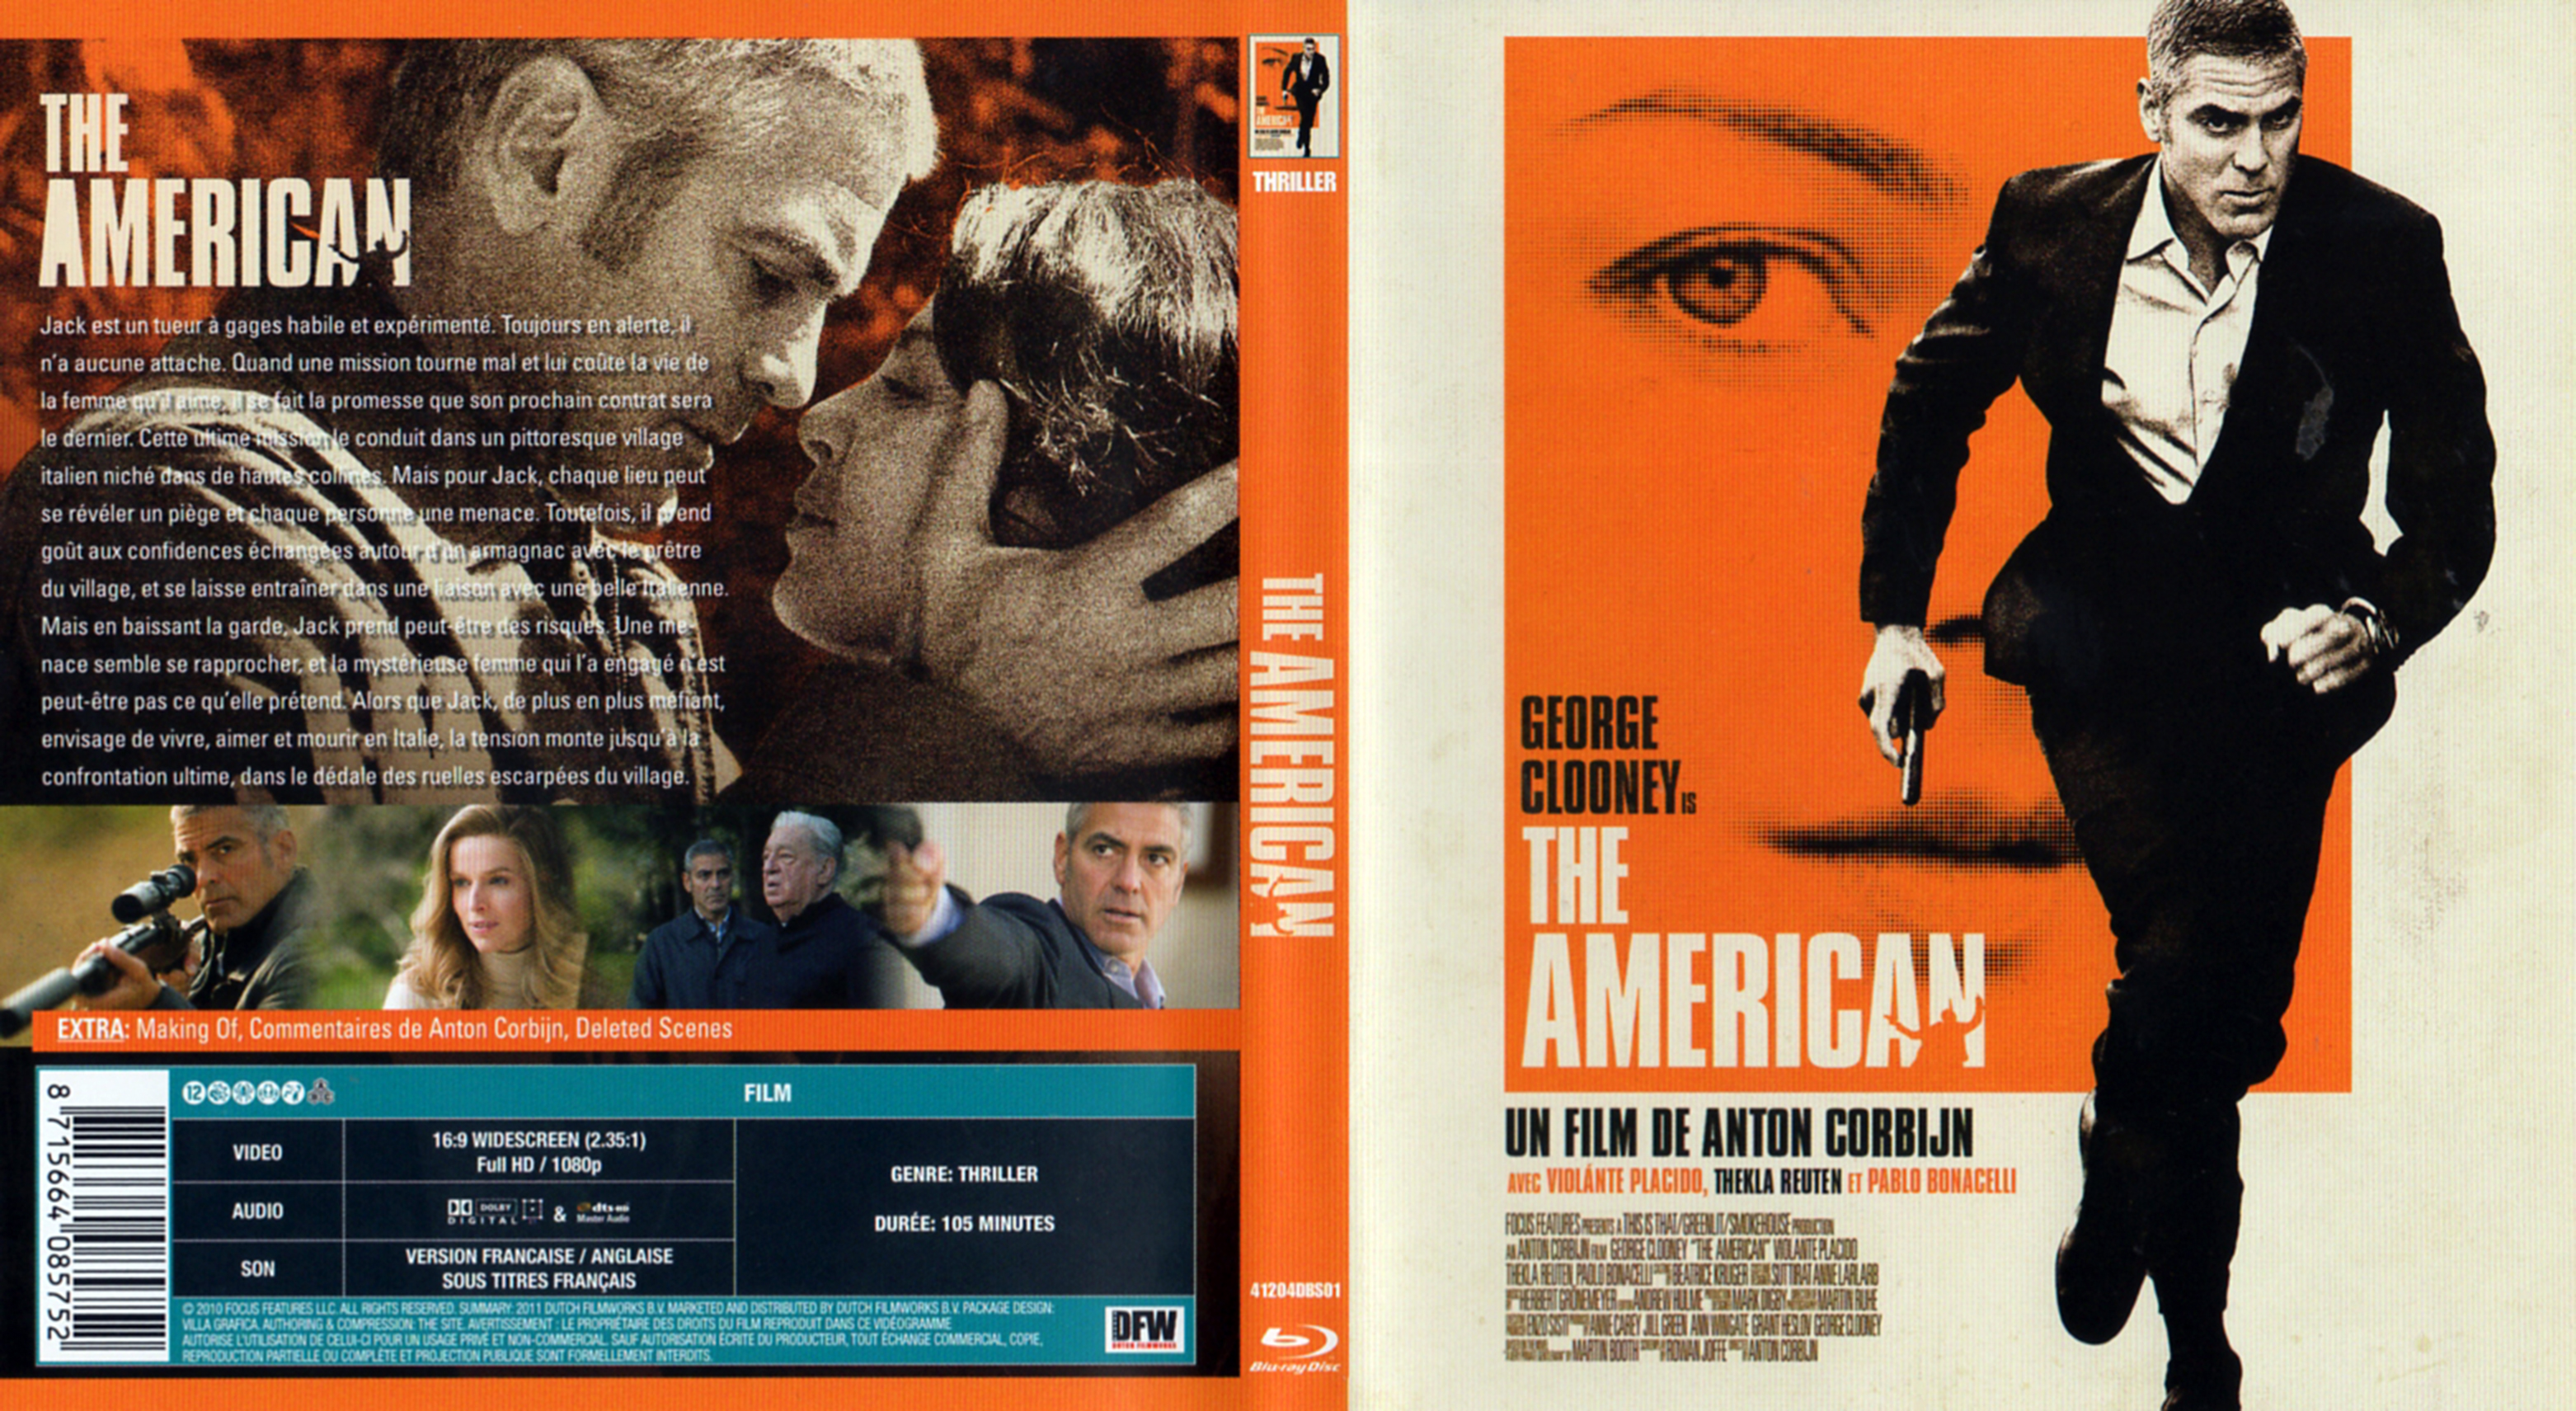 Jaquette DVD The american (BLU-RAY) v2